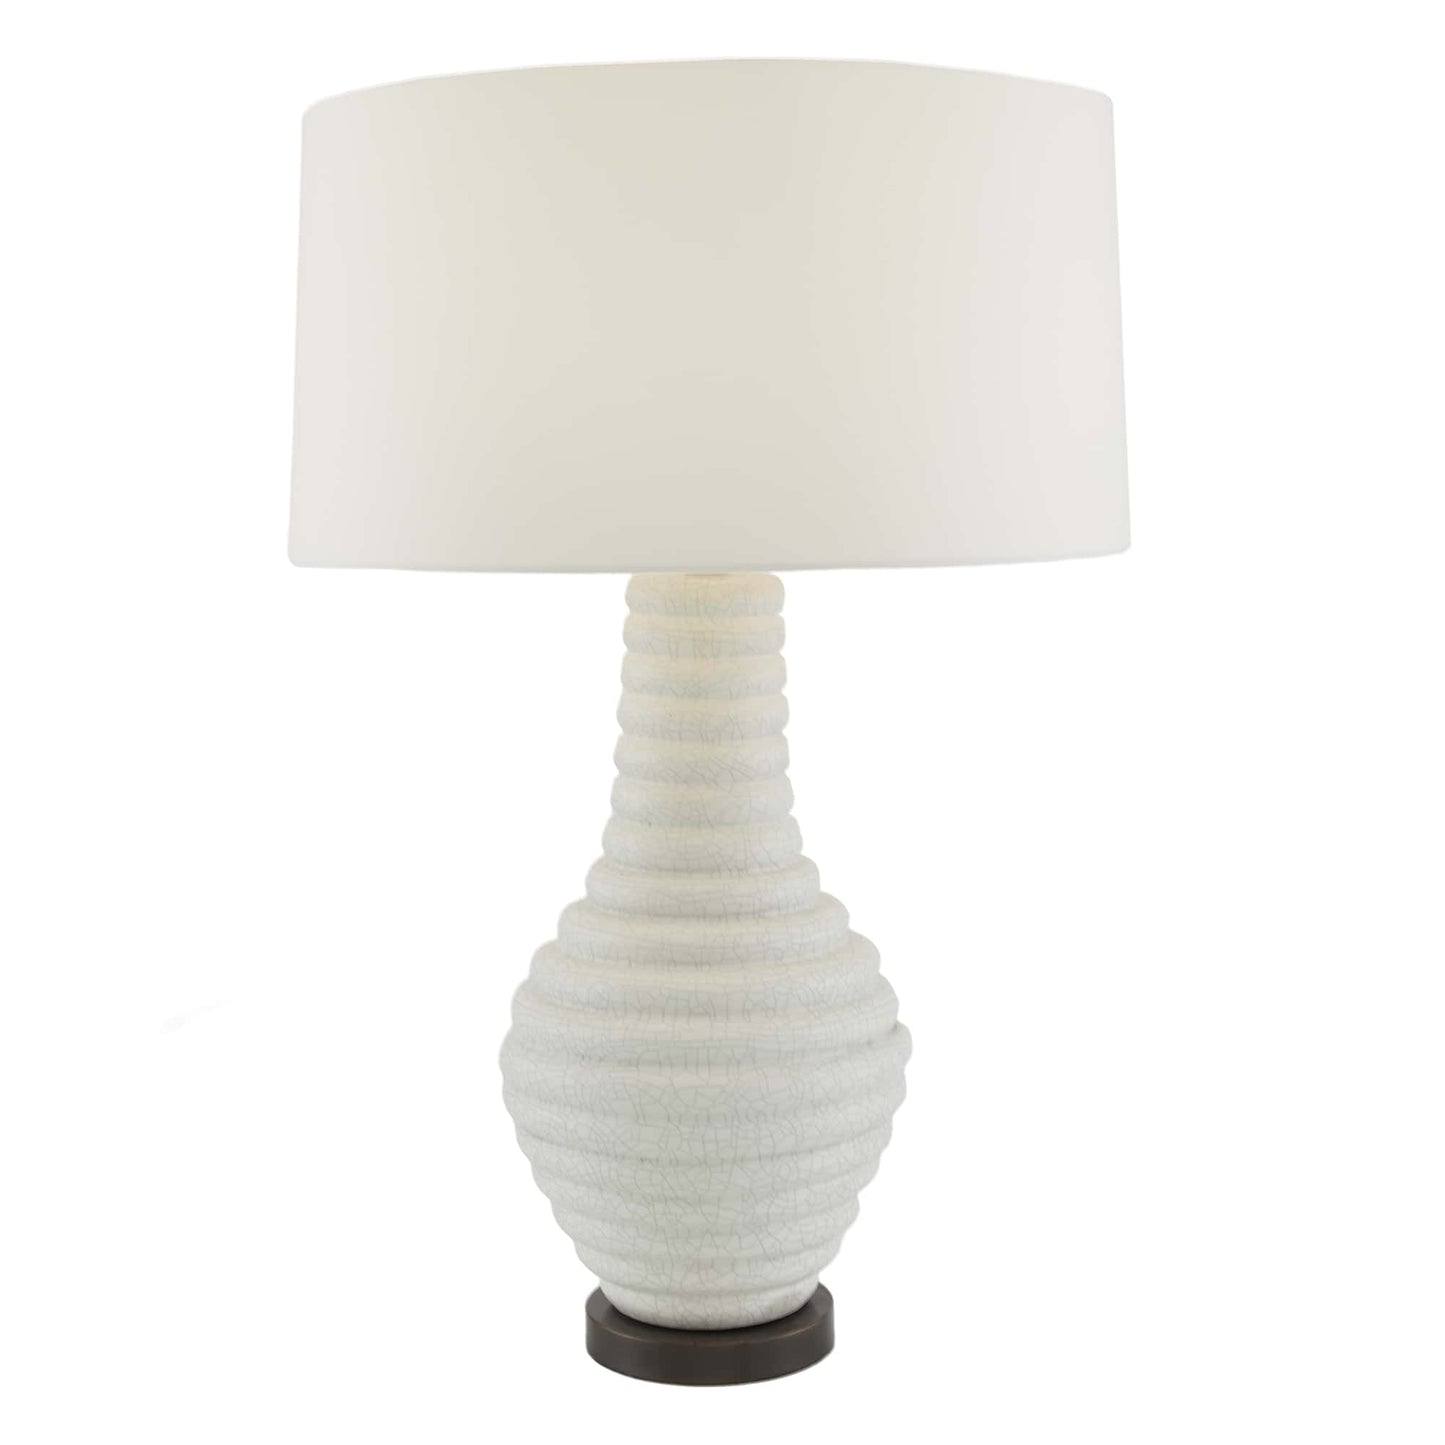 Bartoli Lamp - Timeless Elegance in Antique Brass and Off-White Finish